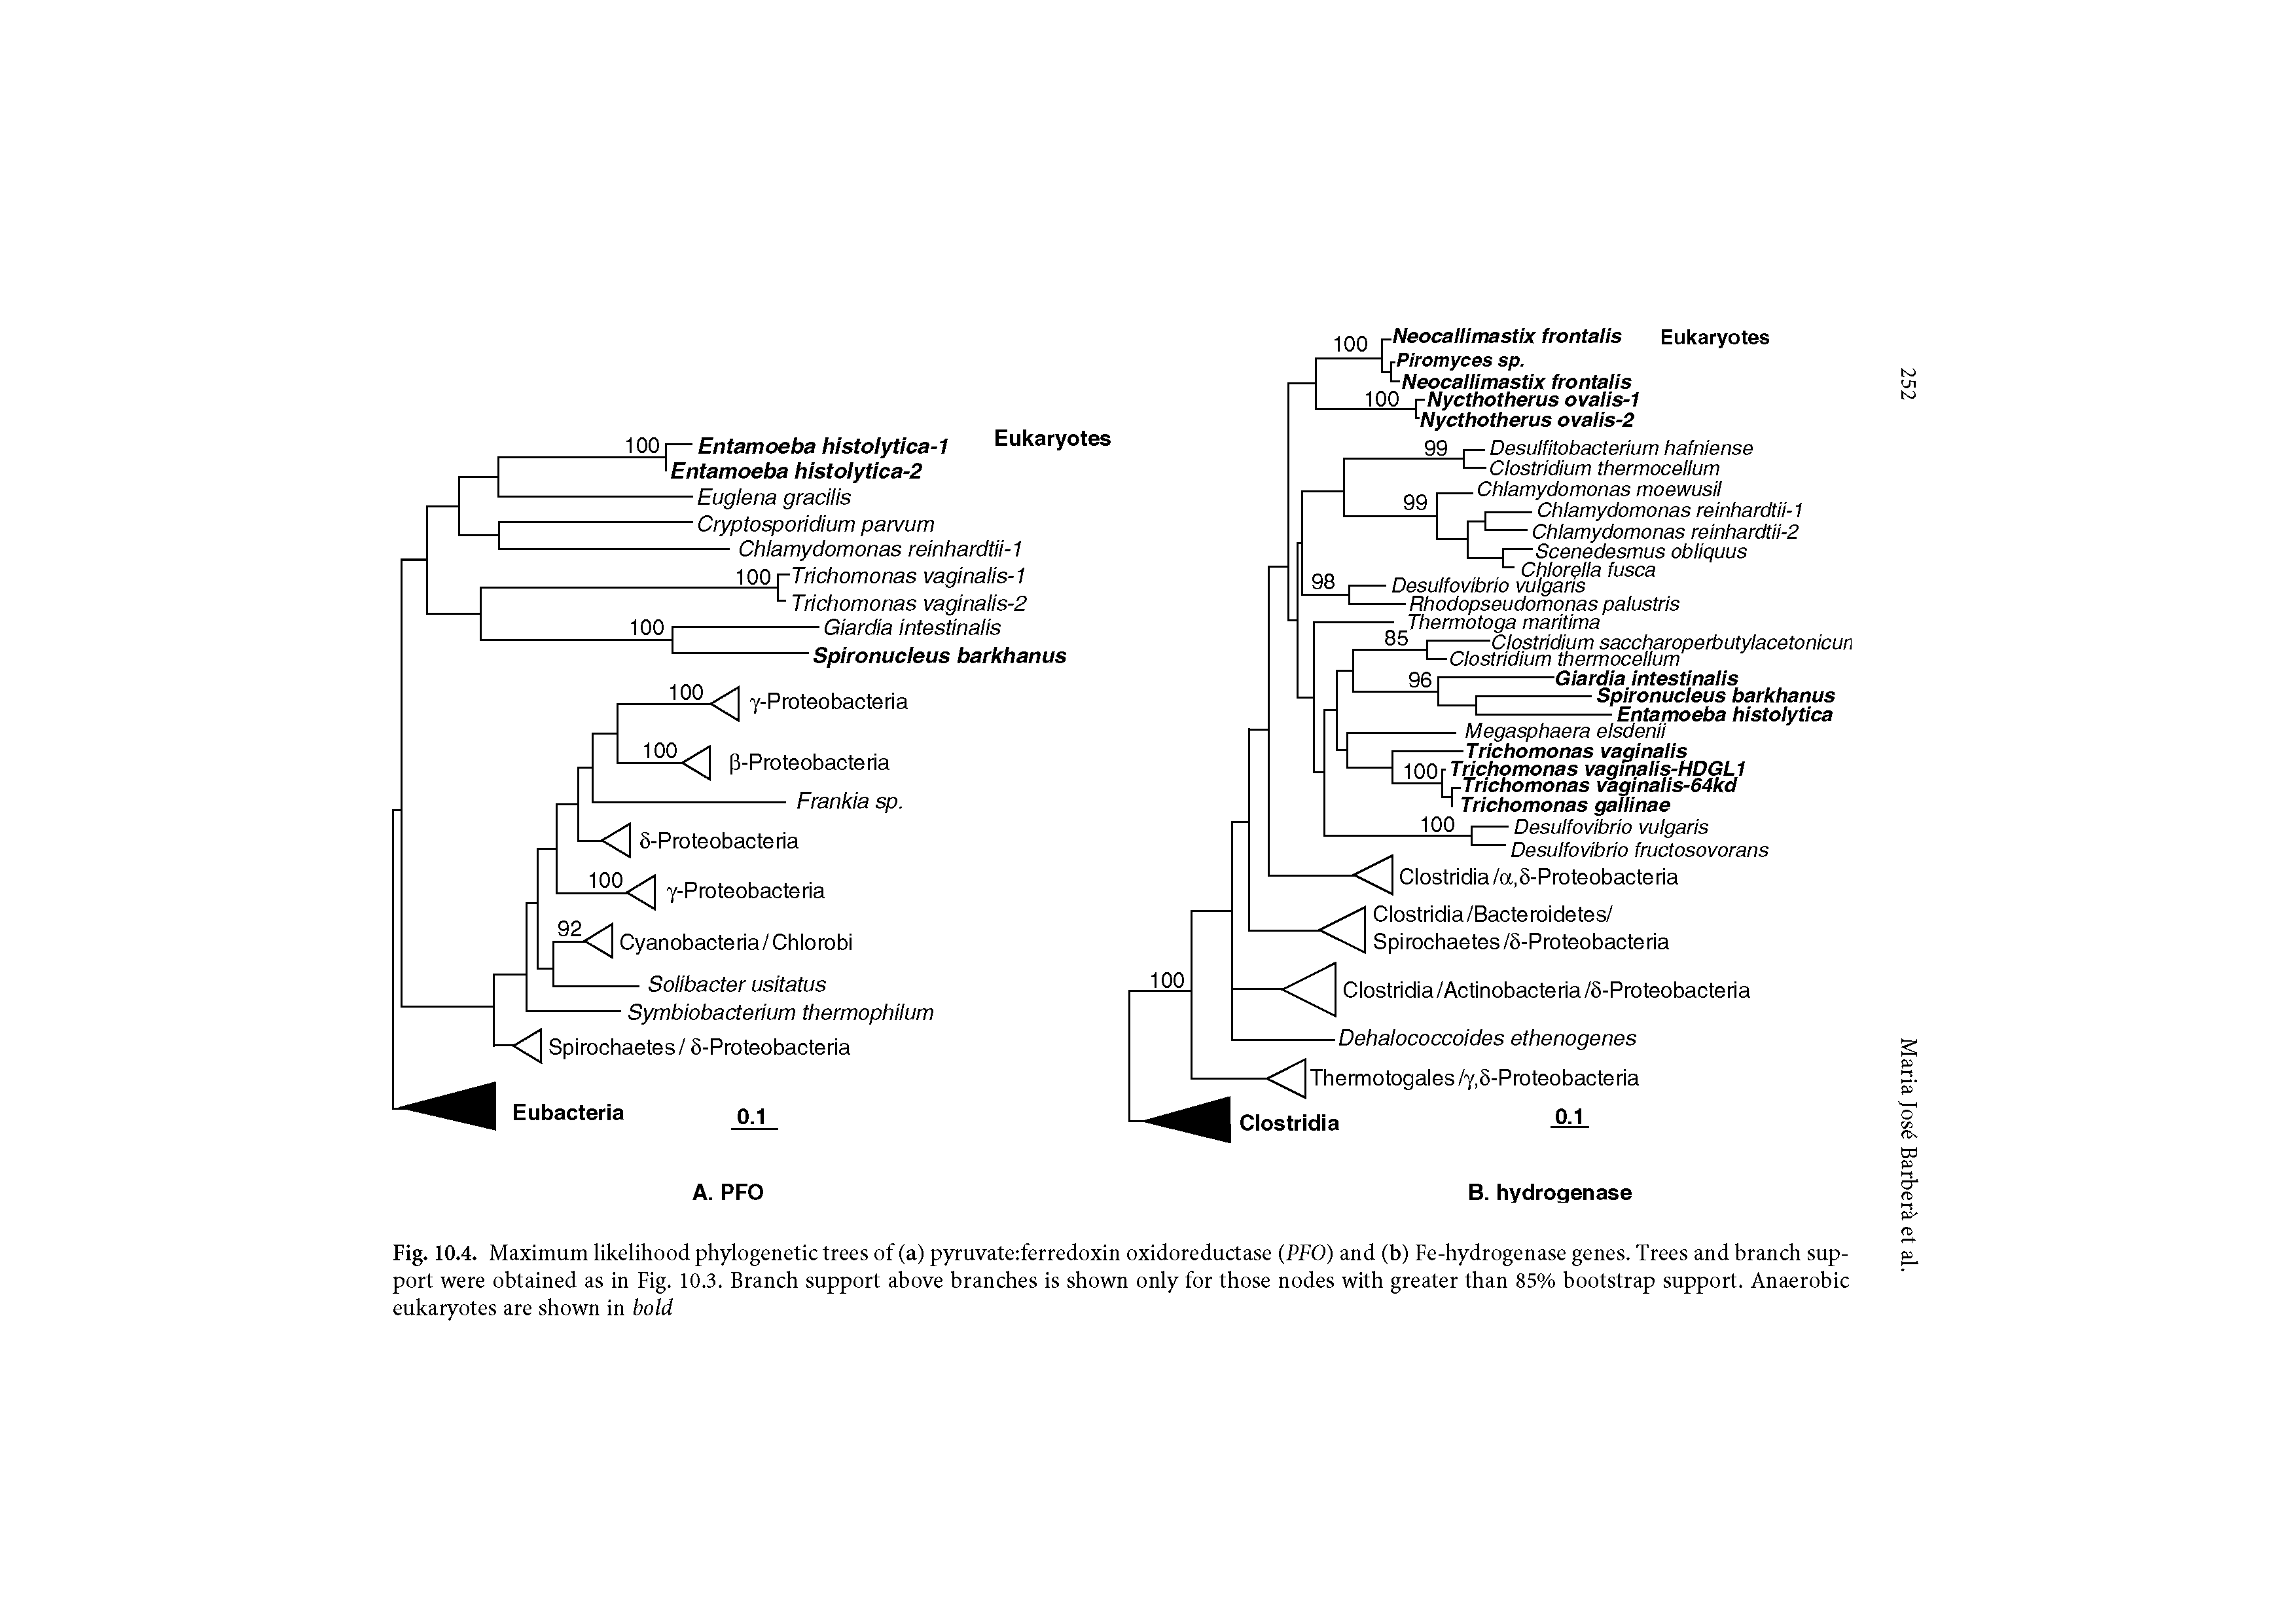 Fig. 10.4. Maximum likelihood phylogenetic trees of (a) pyruvate ferredoxin oxidoreductase (PFO) and (b) Fe-hydrogenase genes. Trees and branch support were obtained as in Fig. 10.3. Branch support above branches is shown only for those nodes with greater than 85% bootstrap support. Anaerobic eukaryotes are shown in bold...